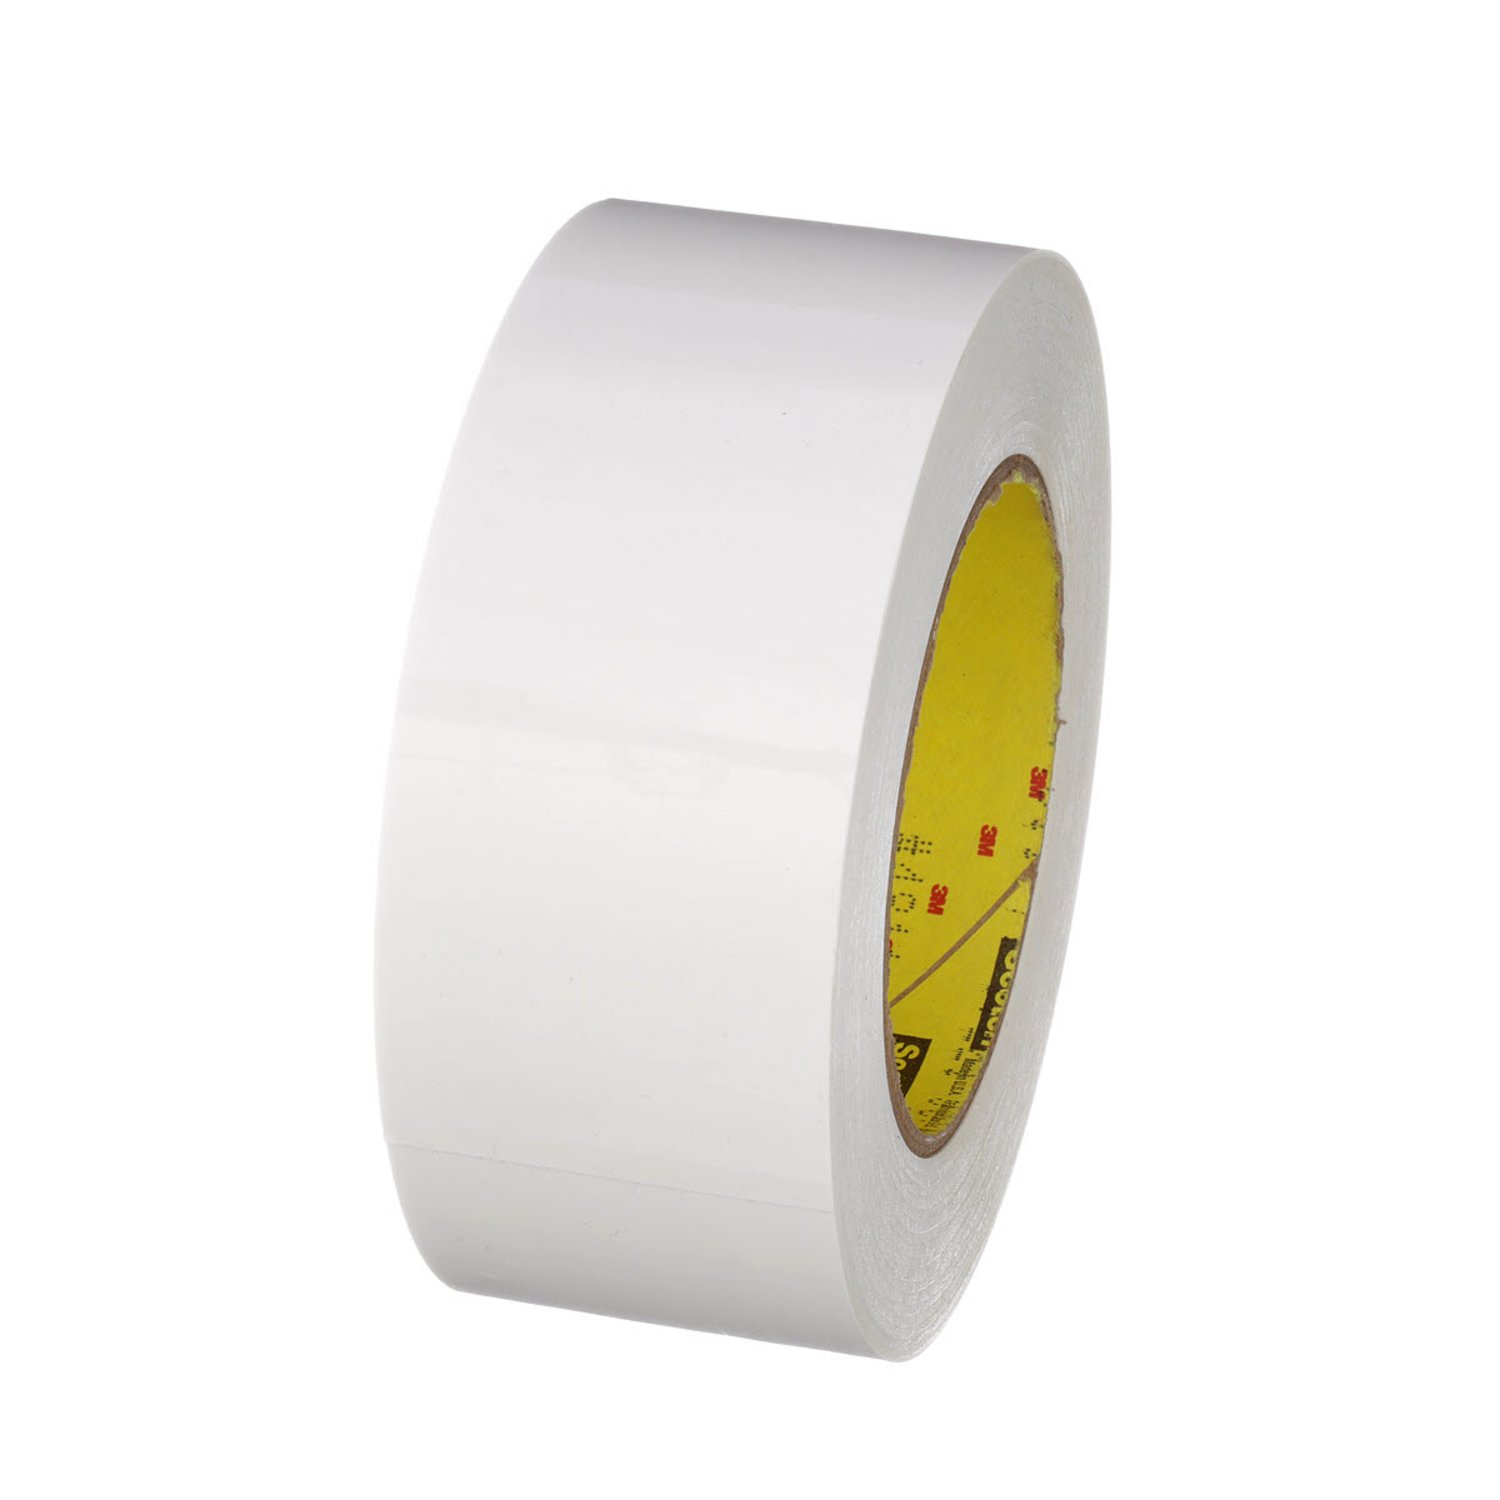 7000123388 - 3M Preservation Sealing Tape 4811, White, 2 in x 36 yd, 9.5 mil, 24
rolls per case